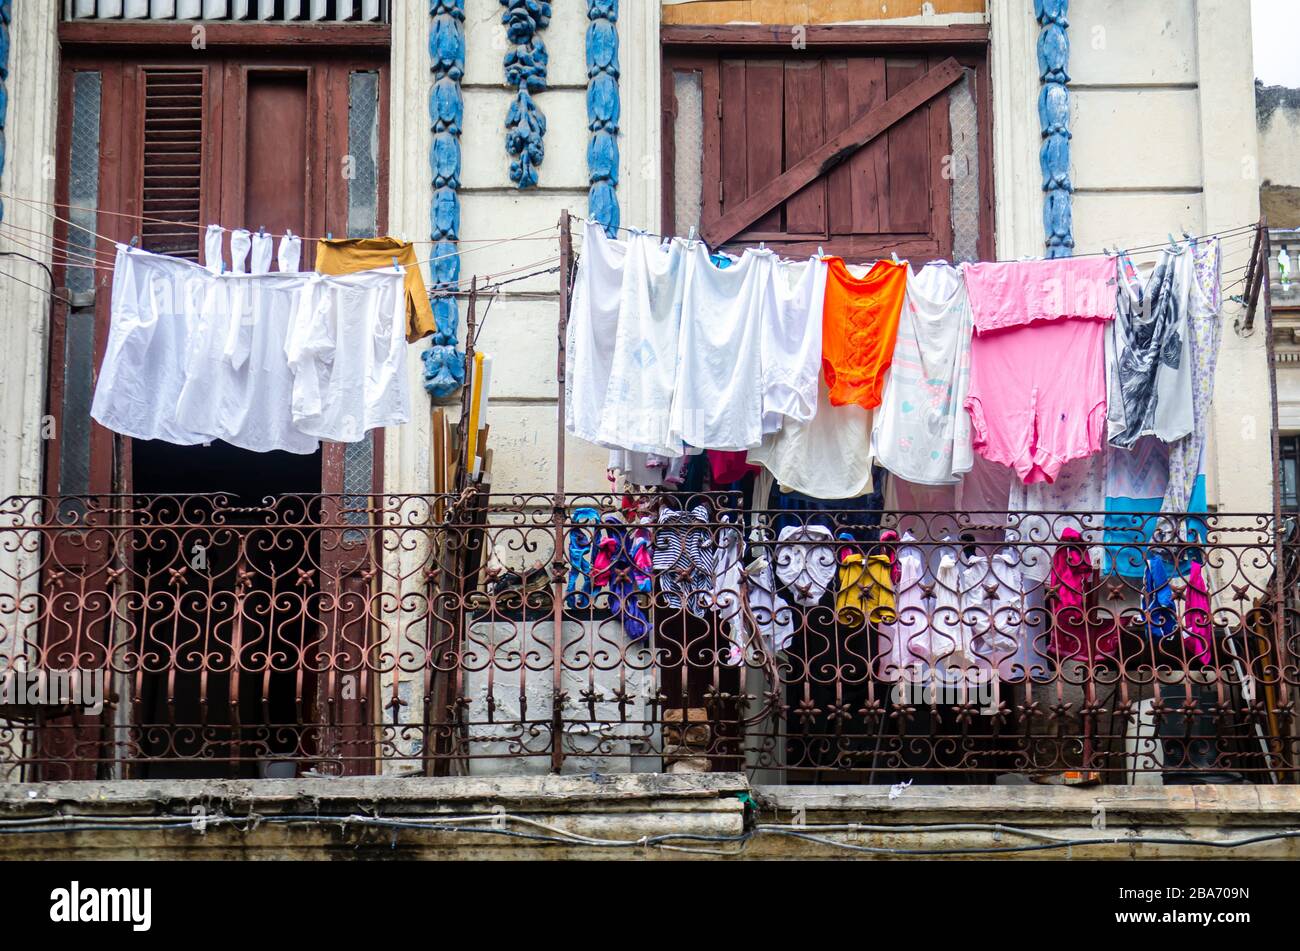 Daily life scene in the houses of La Habana.  People  dry their clothes hanging them in the outdoors Stock Photo